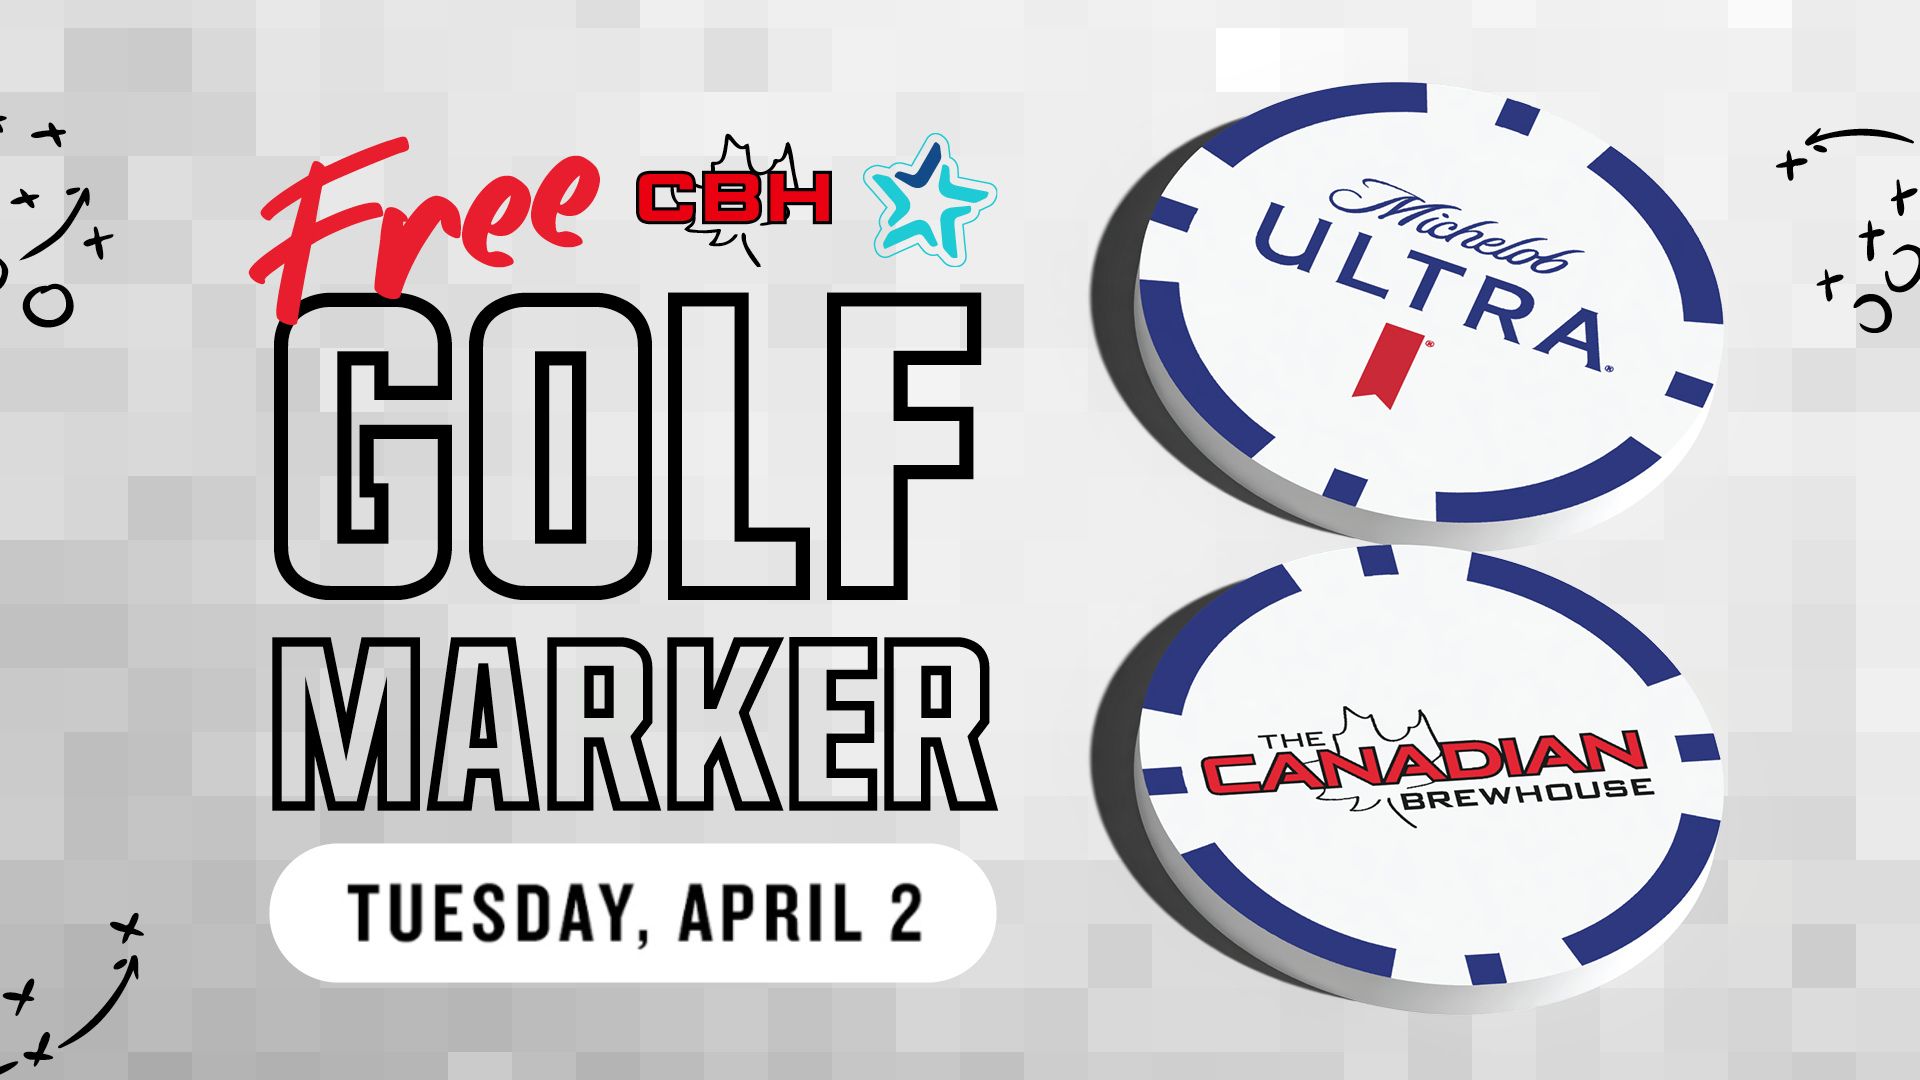 Free CBH Golf Marker Tuesday April 2. Next to the text is a front and back image of a white golf marker with blue trim and the Michelob Ultra logo on one side, and The Canadian Brewhouse logo on the other.